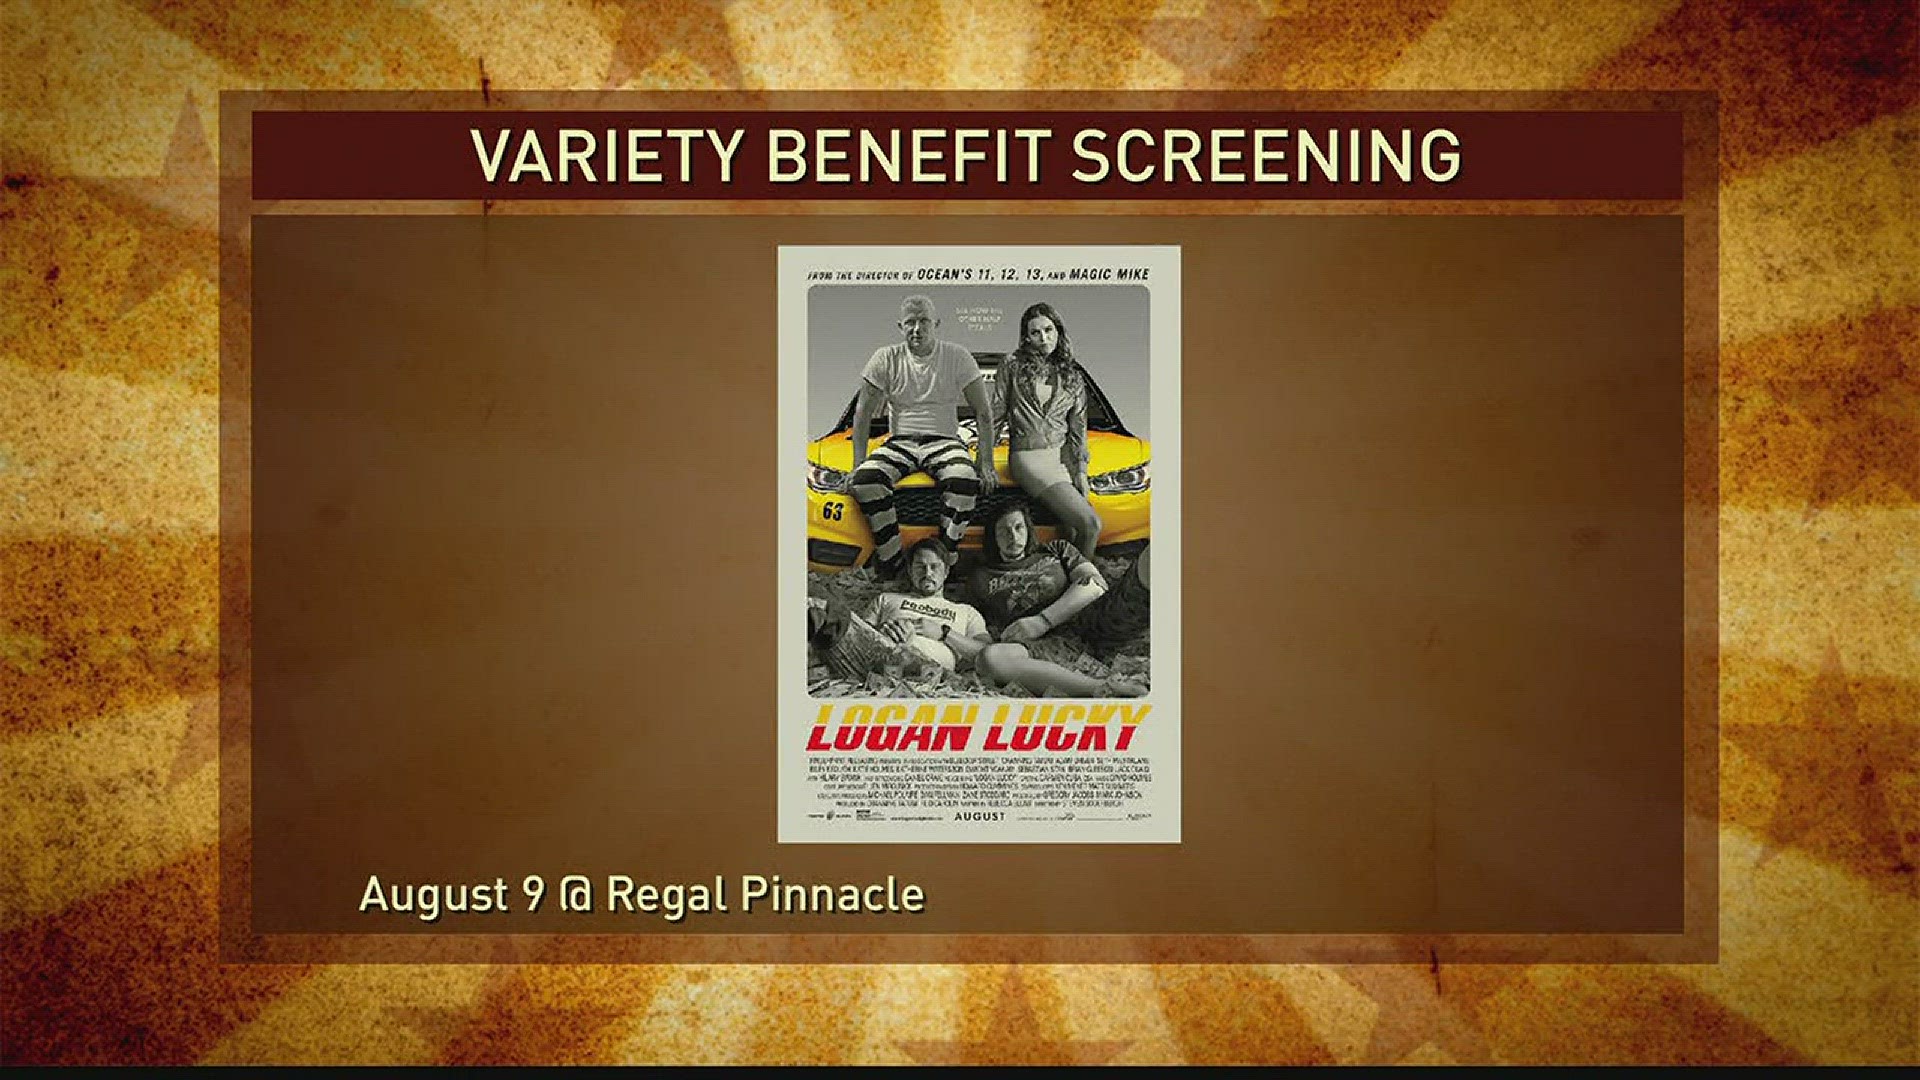 Actor Channing Tatum and director Steven Soderbergh will attend a benefit screening for their new movie, Logan Lucky, in Knoxville to benefit Regal's Variety- A Children's Charity.